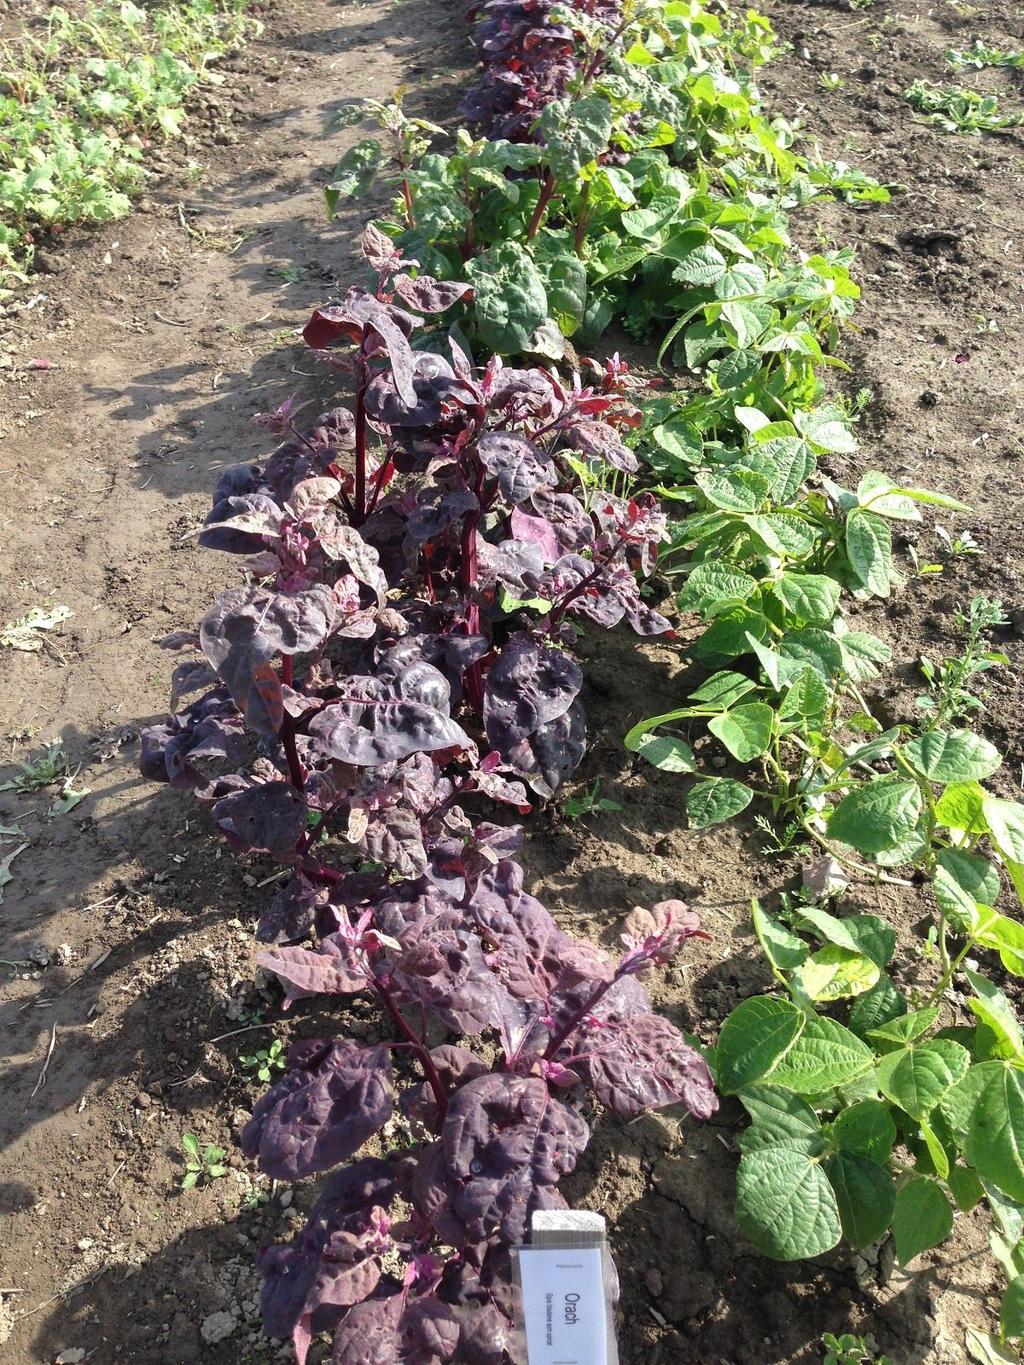 Orach - can be used as spinach.